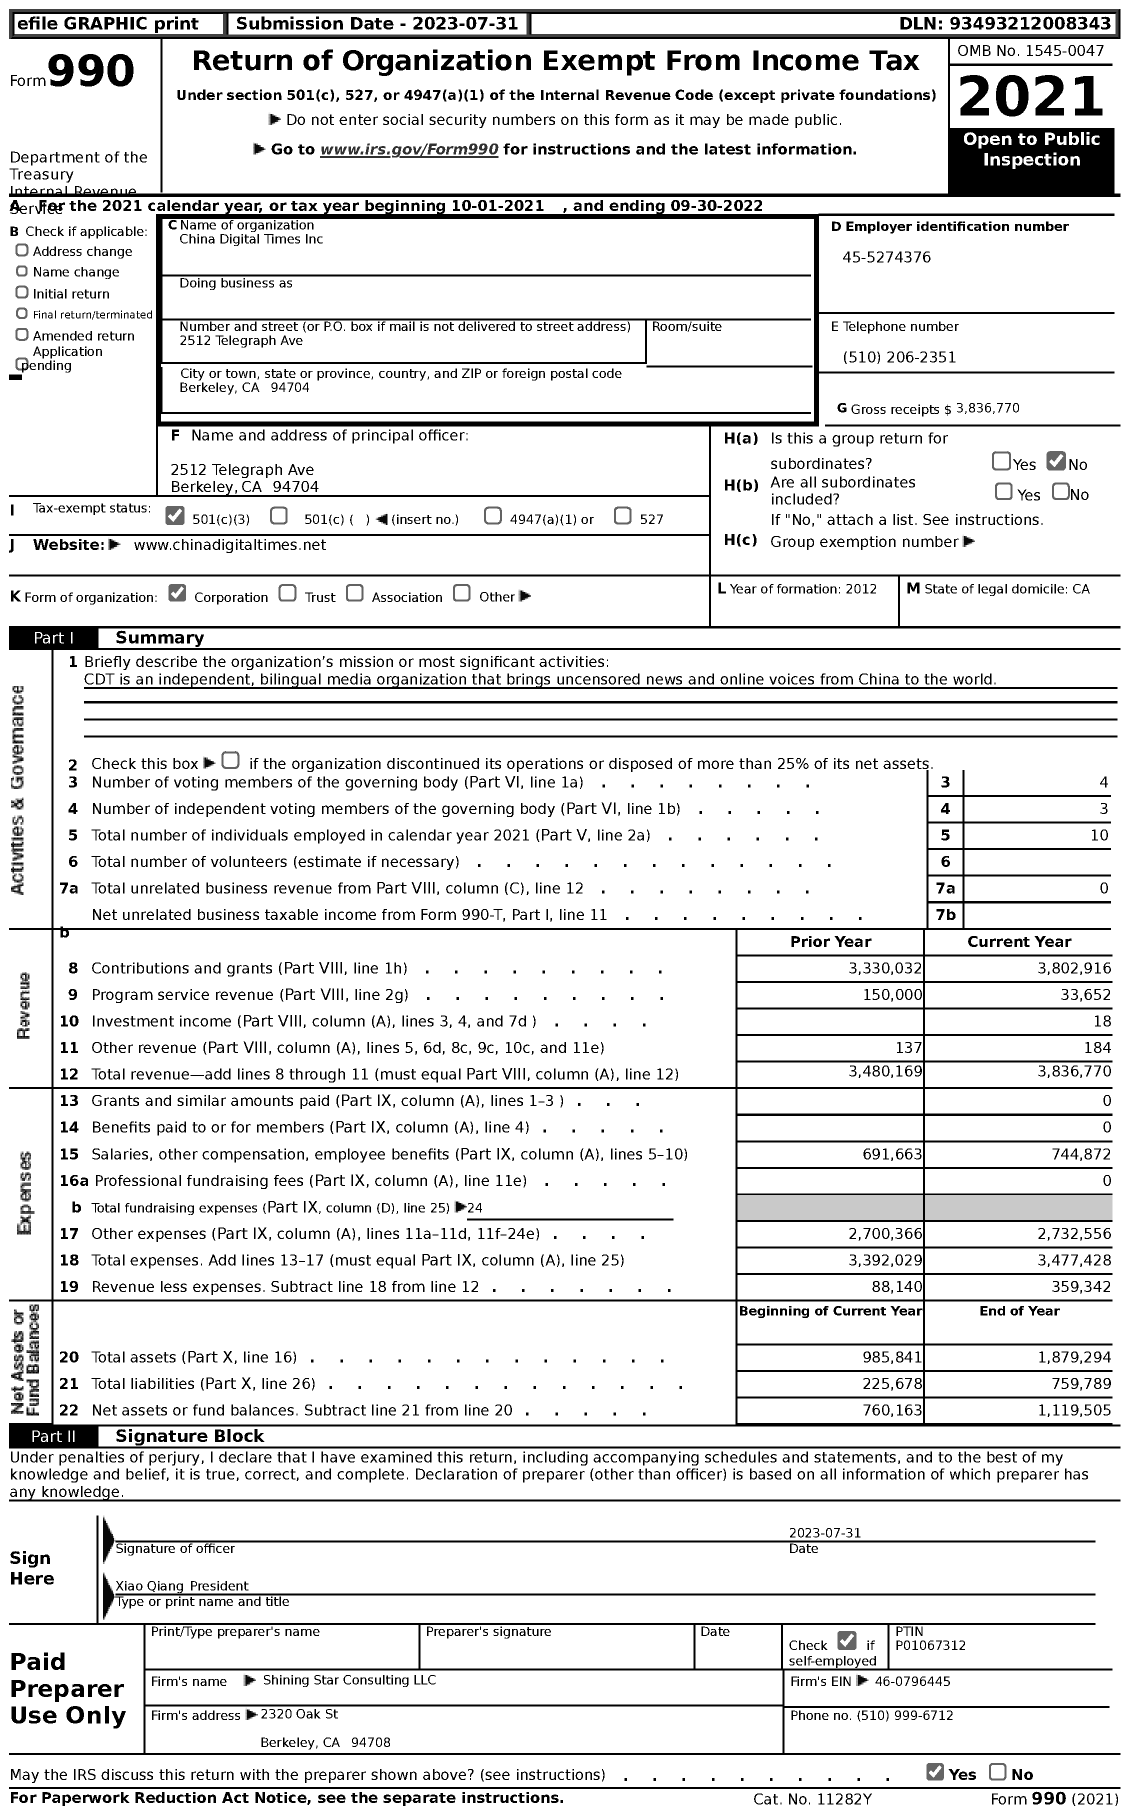 Image of first page of 2021 Form 990 for China Digital Times